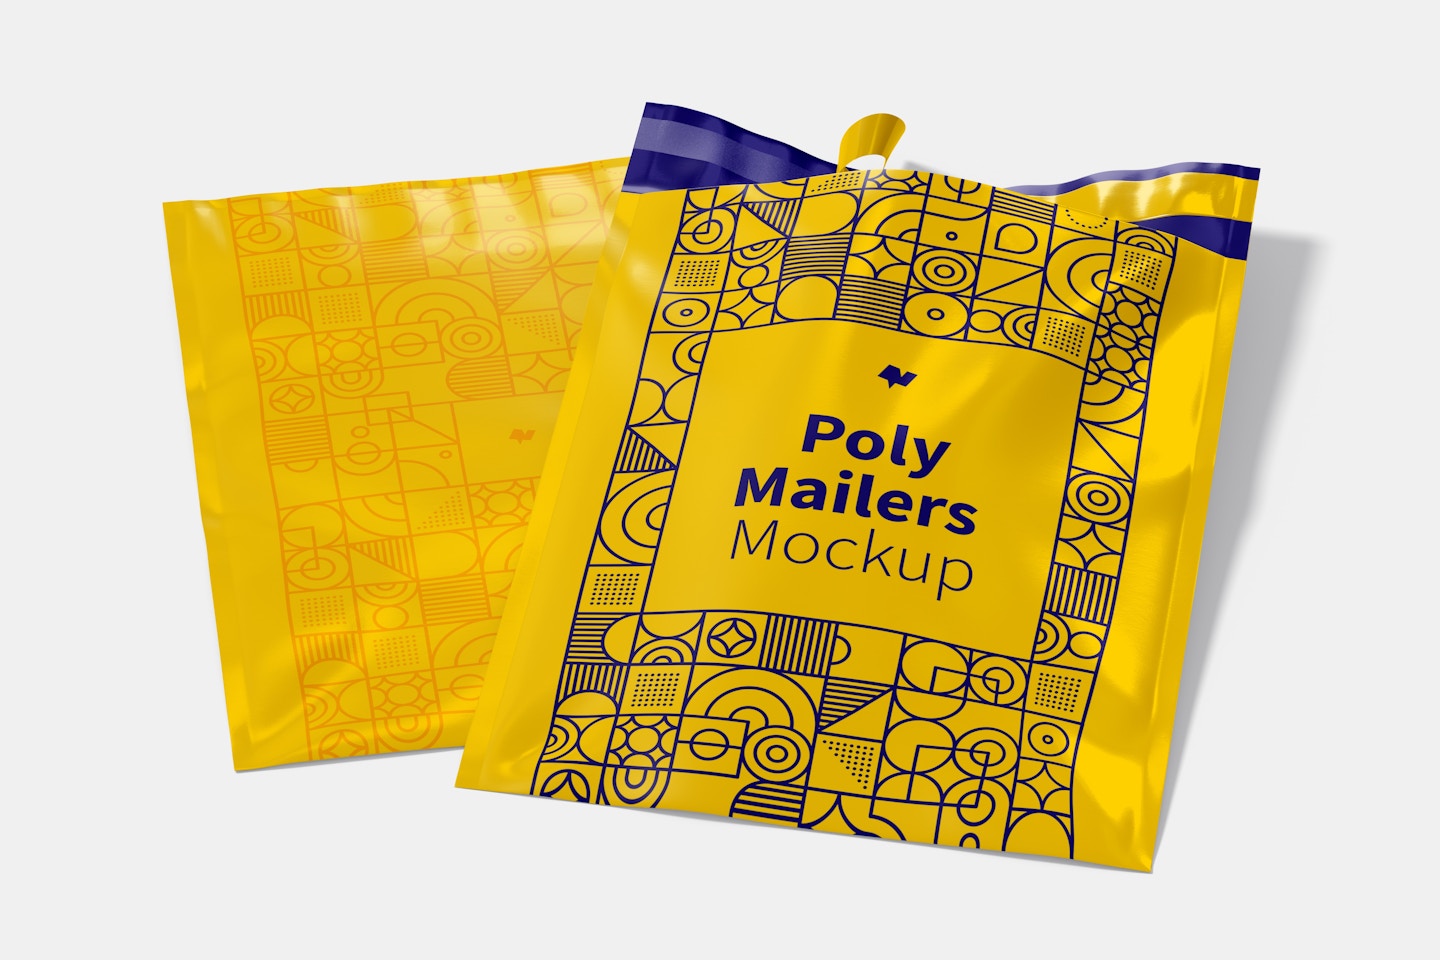 Poly Mailers Mockup, Opened and Closed